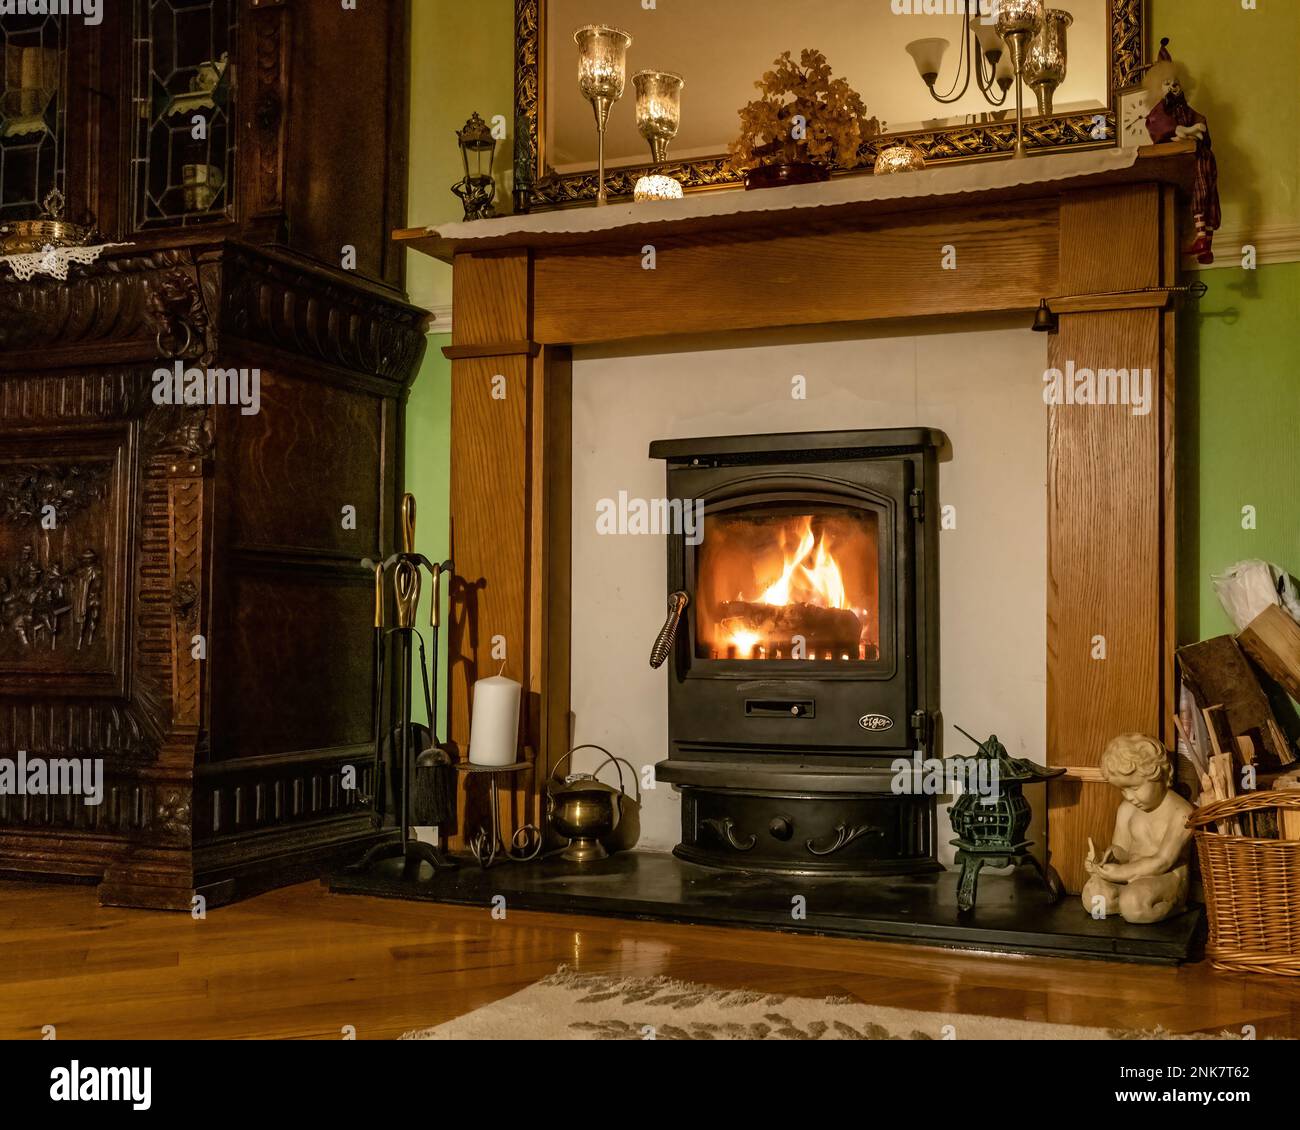 Cosy winter living room fireplace, with wood burning stove, UK home interior. Stock Photo